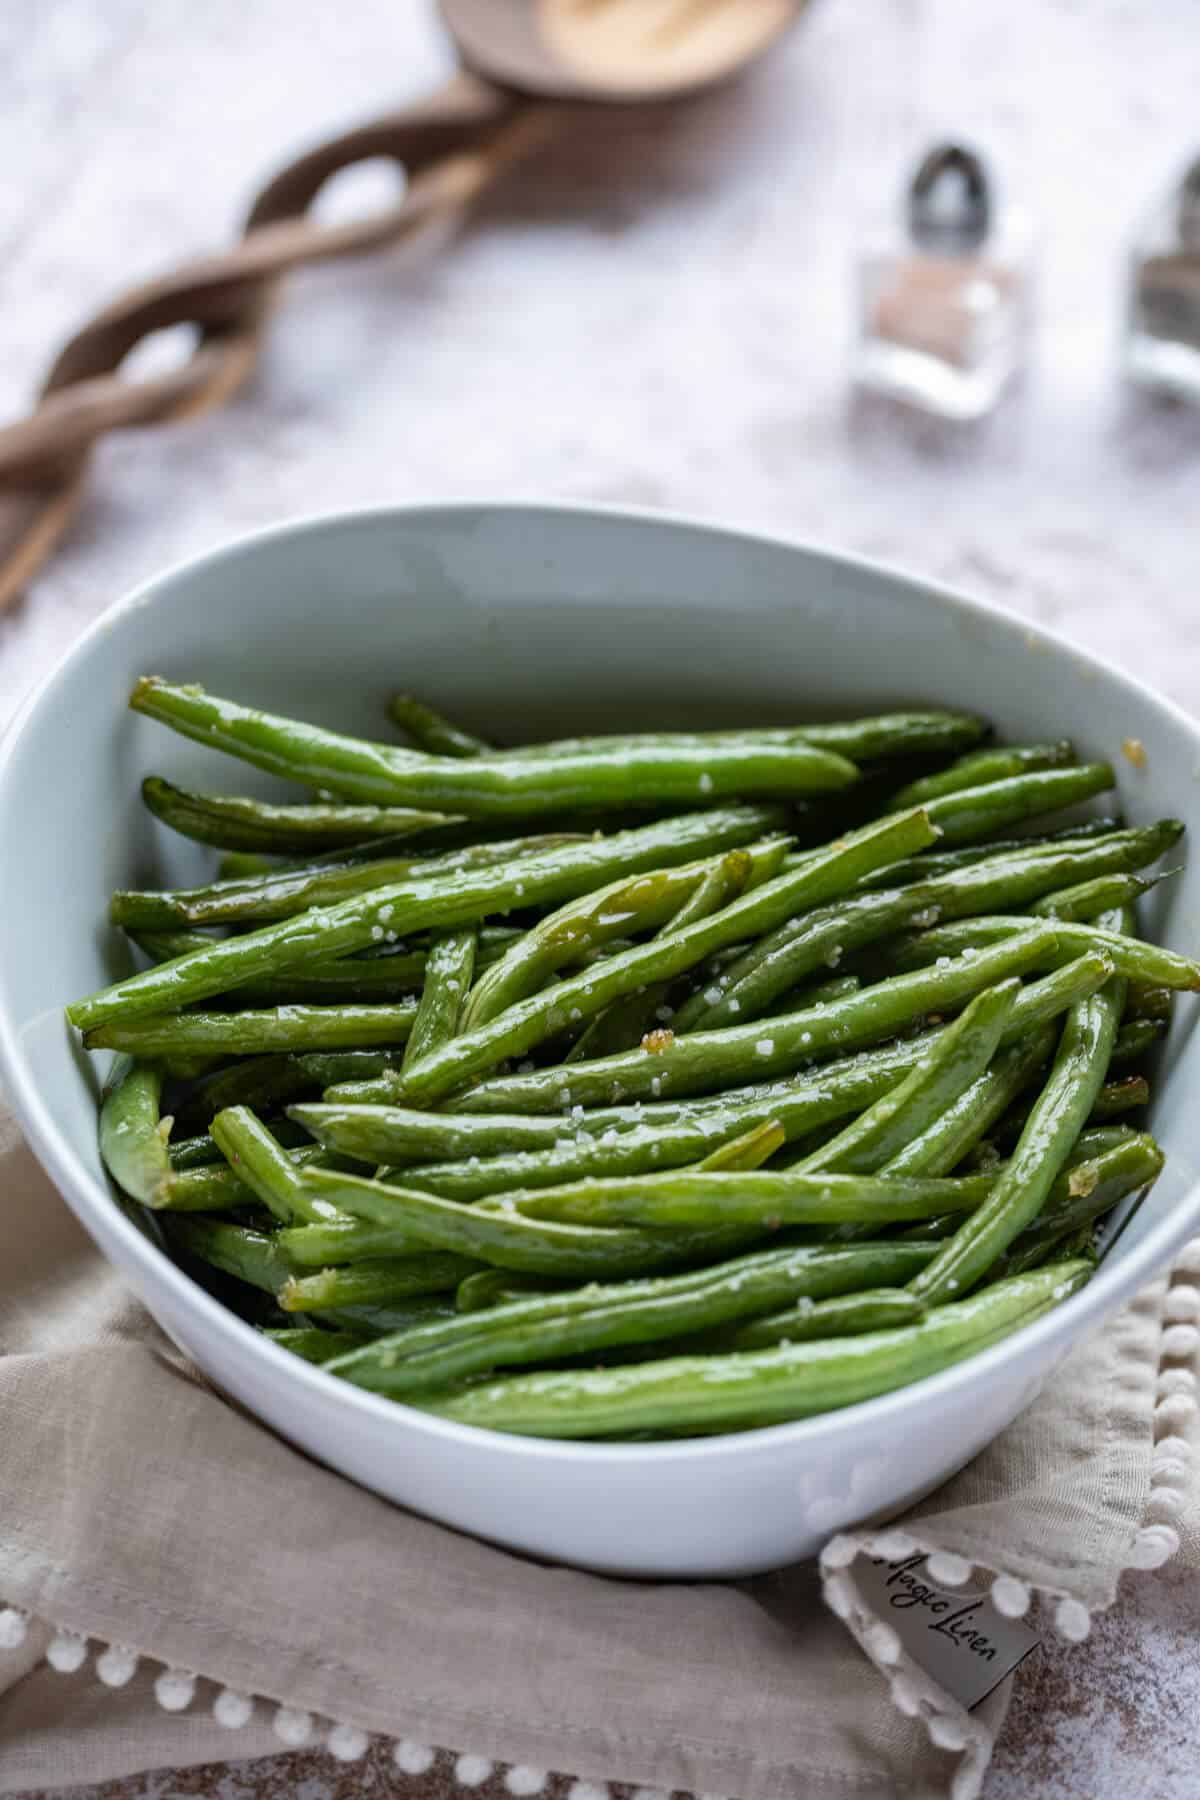 Garlic Butter Green Beans seasoned with coarse salt, in a white serving bowl.